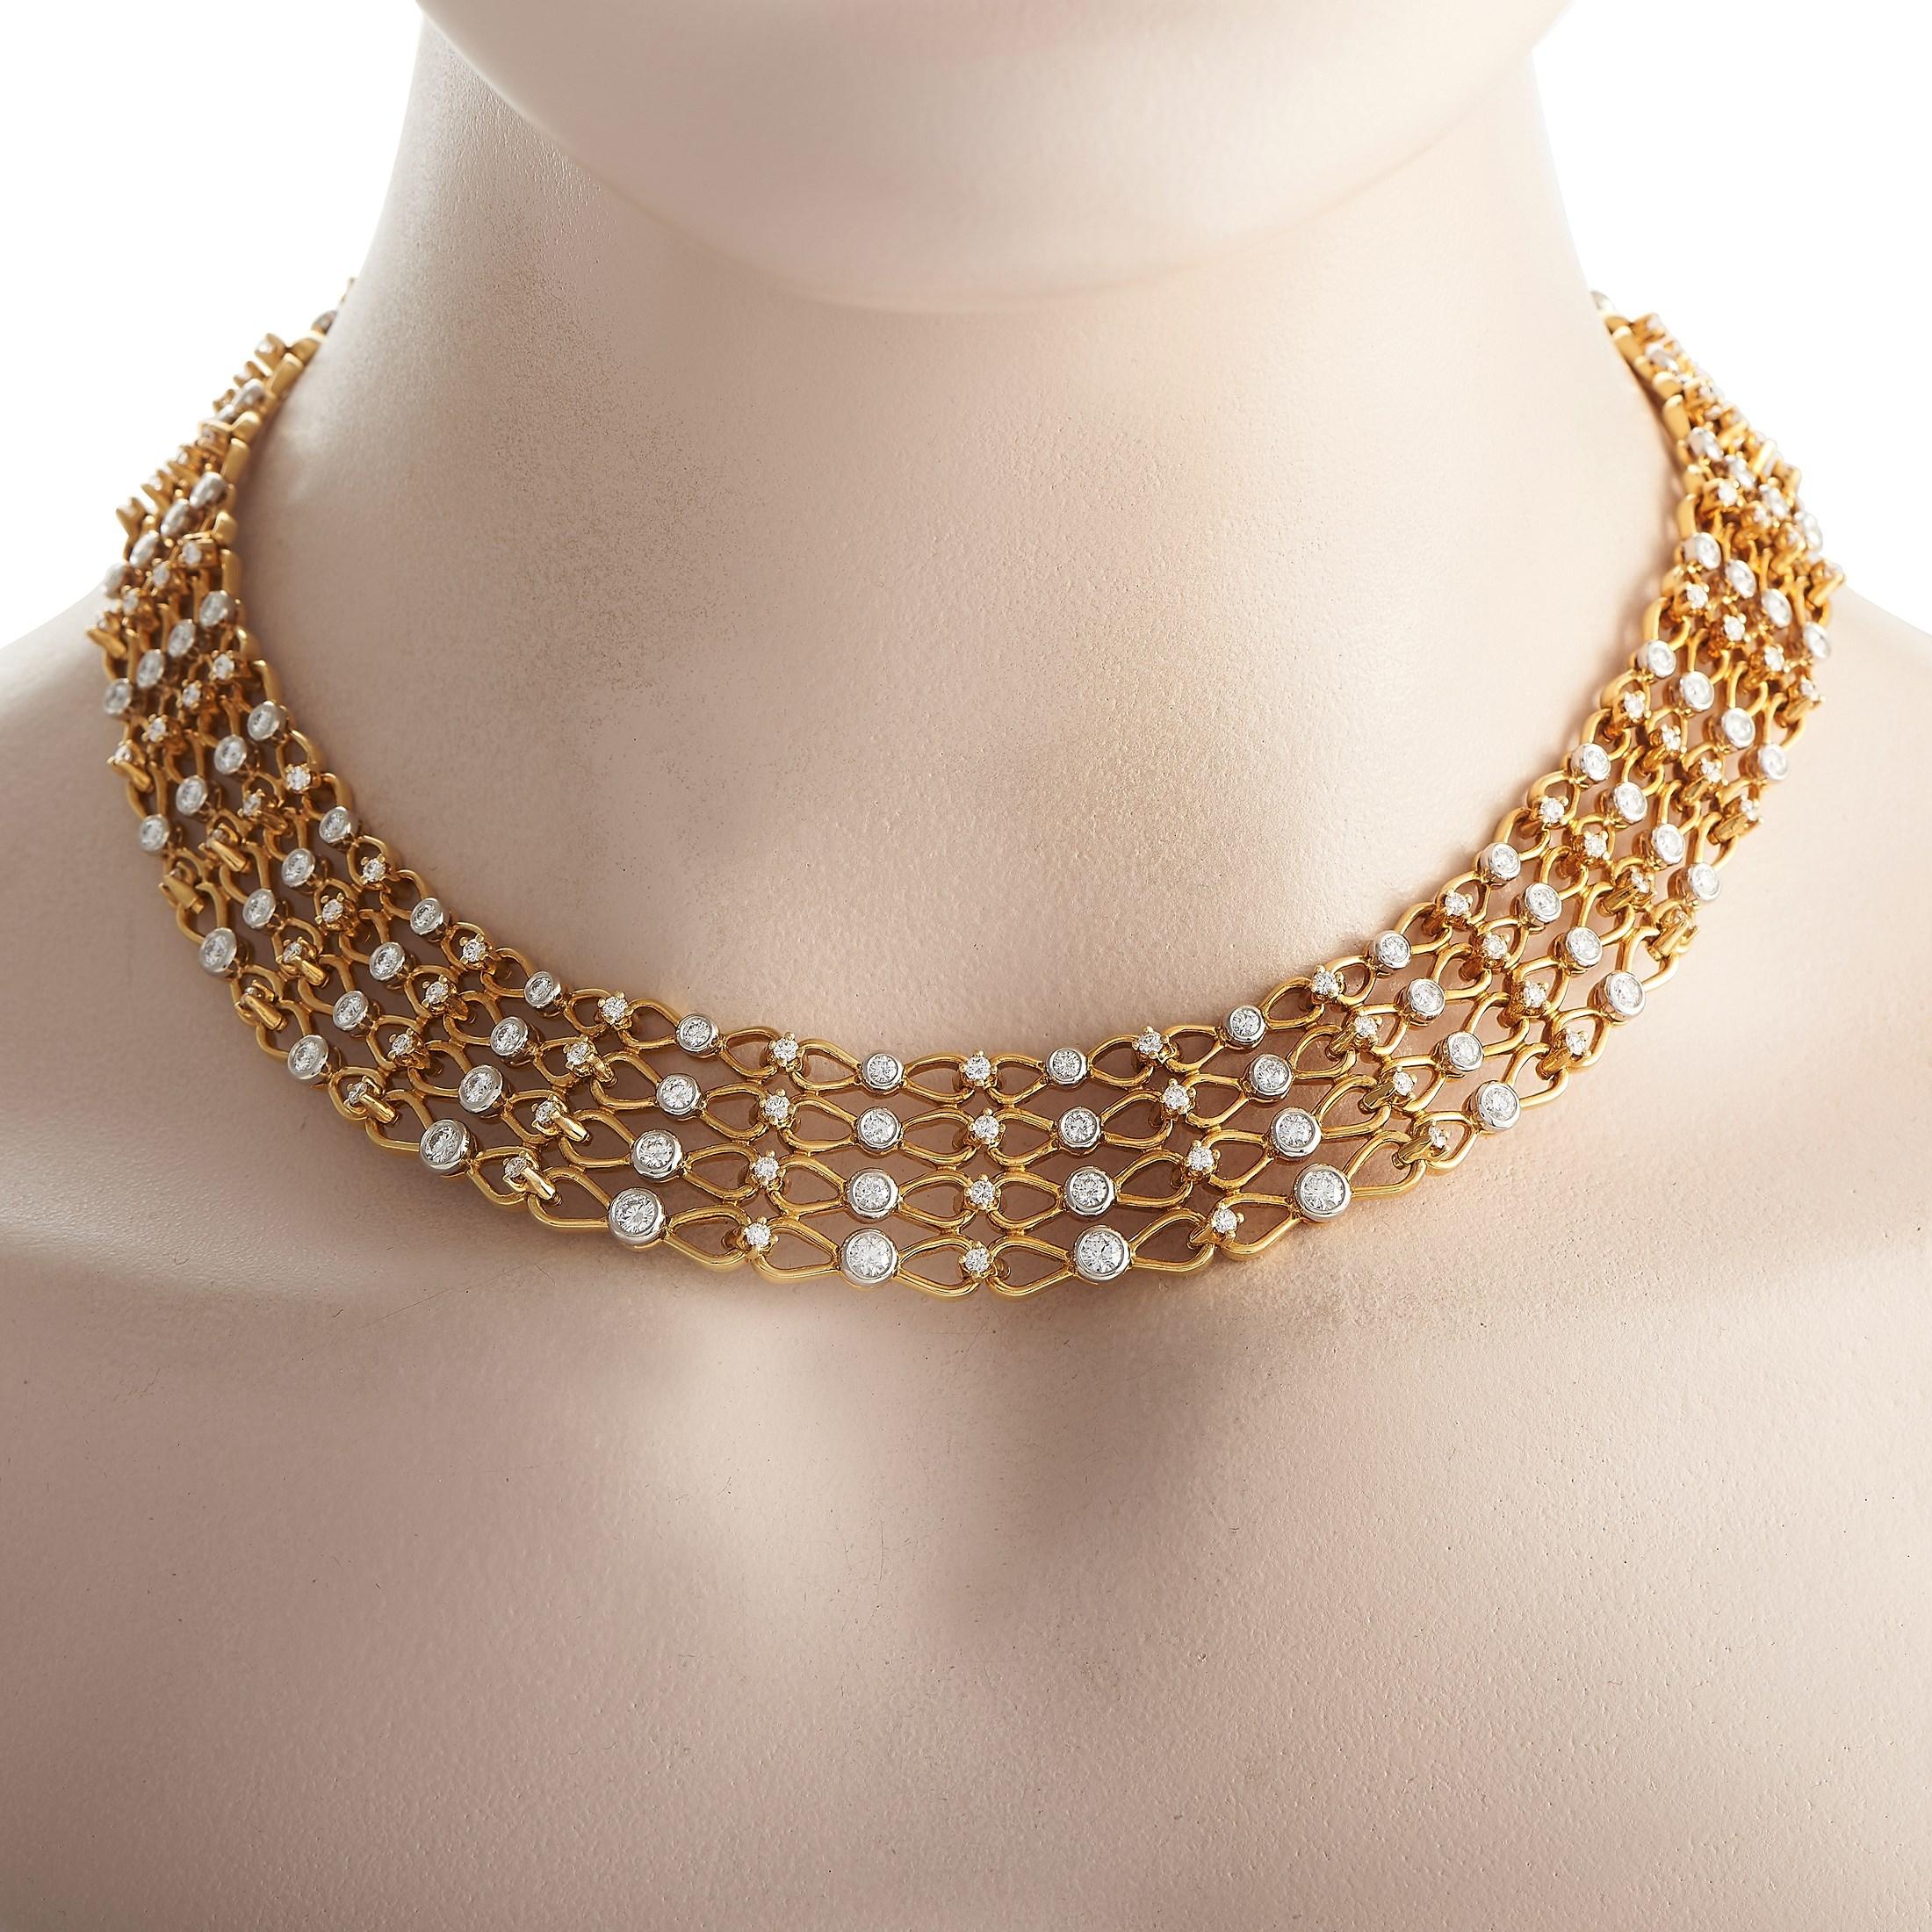 Ready to make you swoon is this Tiffany & Co. 18K Yellow Gold 16.5 ct Diamond Link Collar Necklace. Designed Cleopatra-style, expect this accessory to bring the goddess in you to life.  It features a tapered collar design of yellow gold links